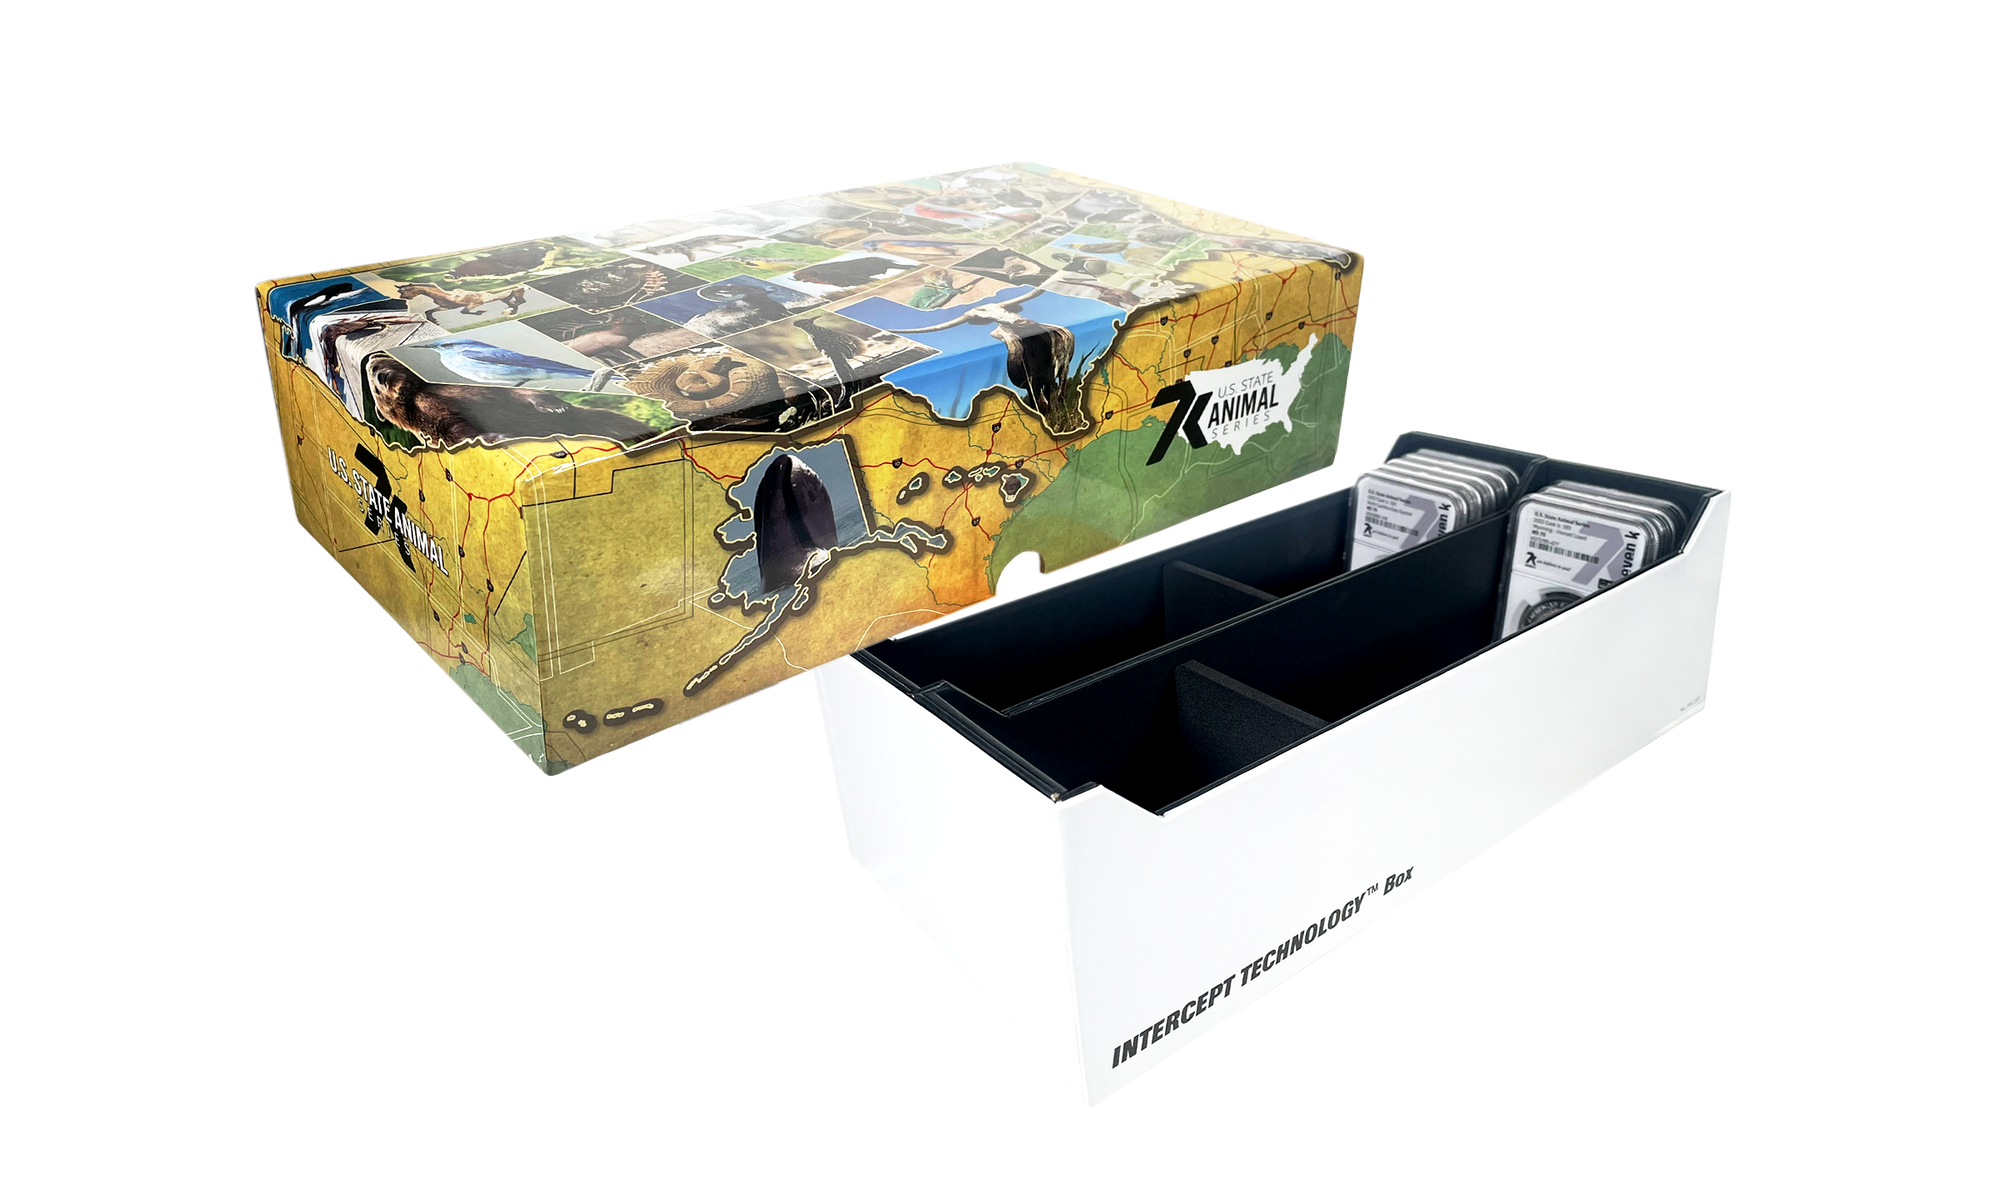 7k US State Animal Coin Collection Box